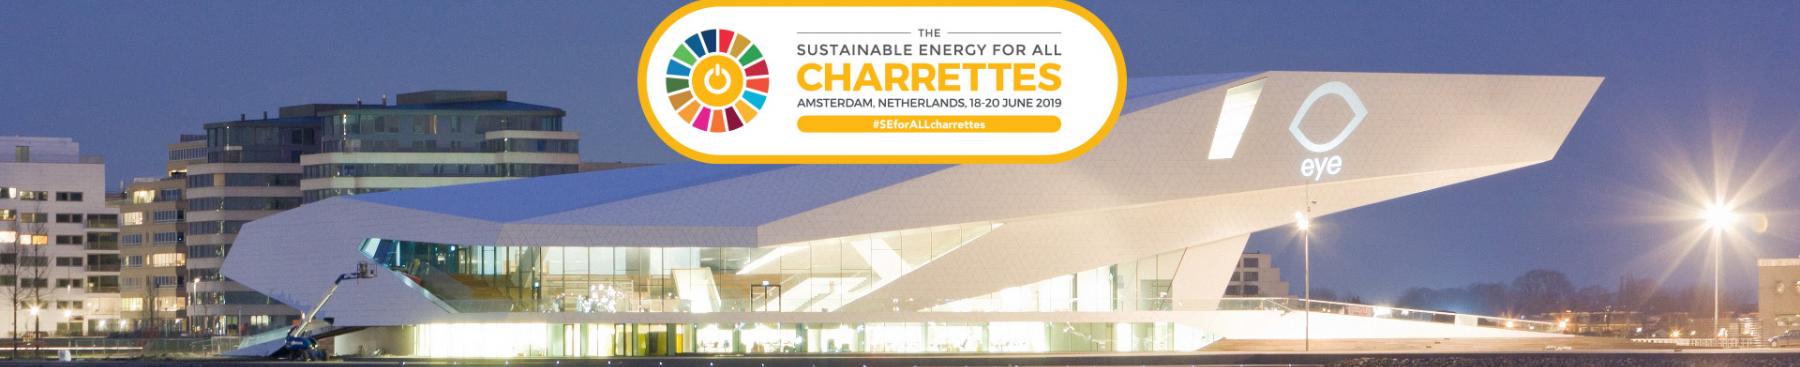 Sustainable Energy for All Charrettes